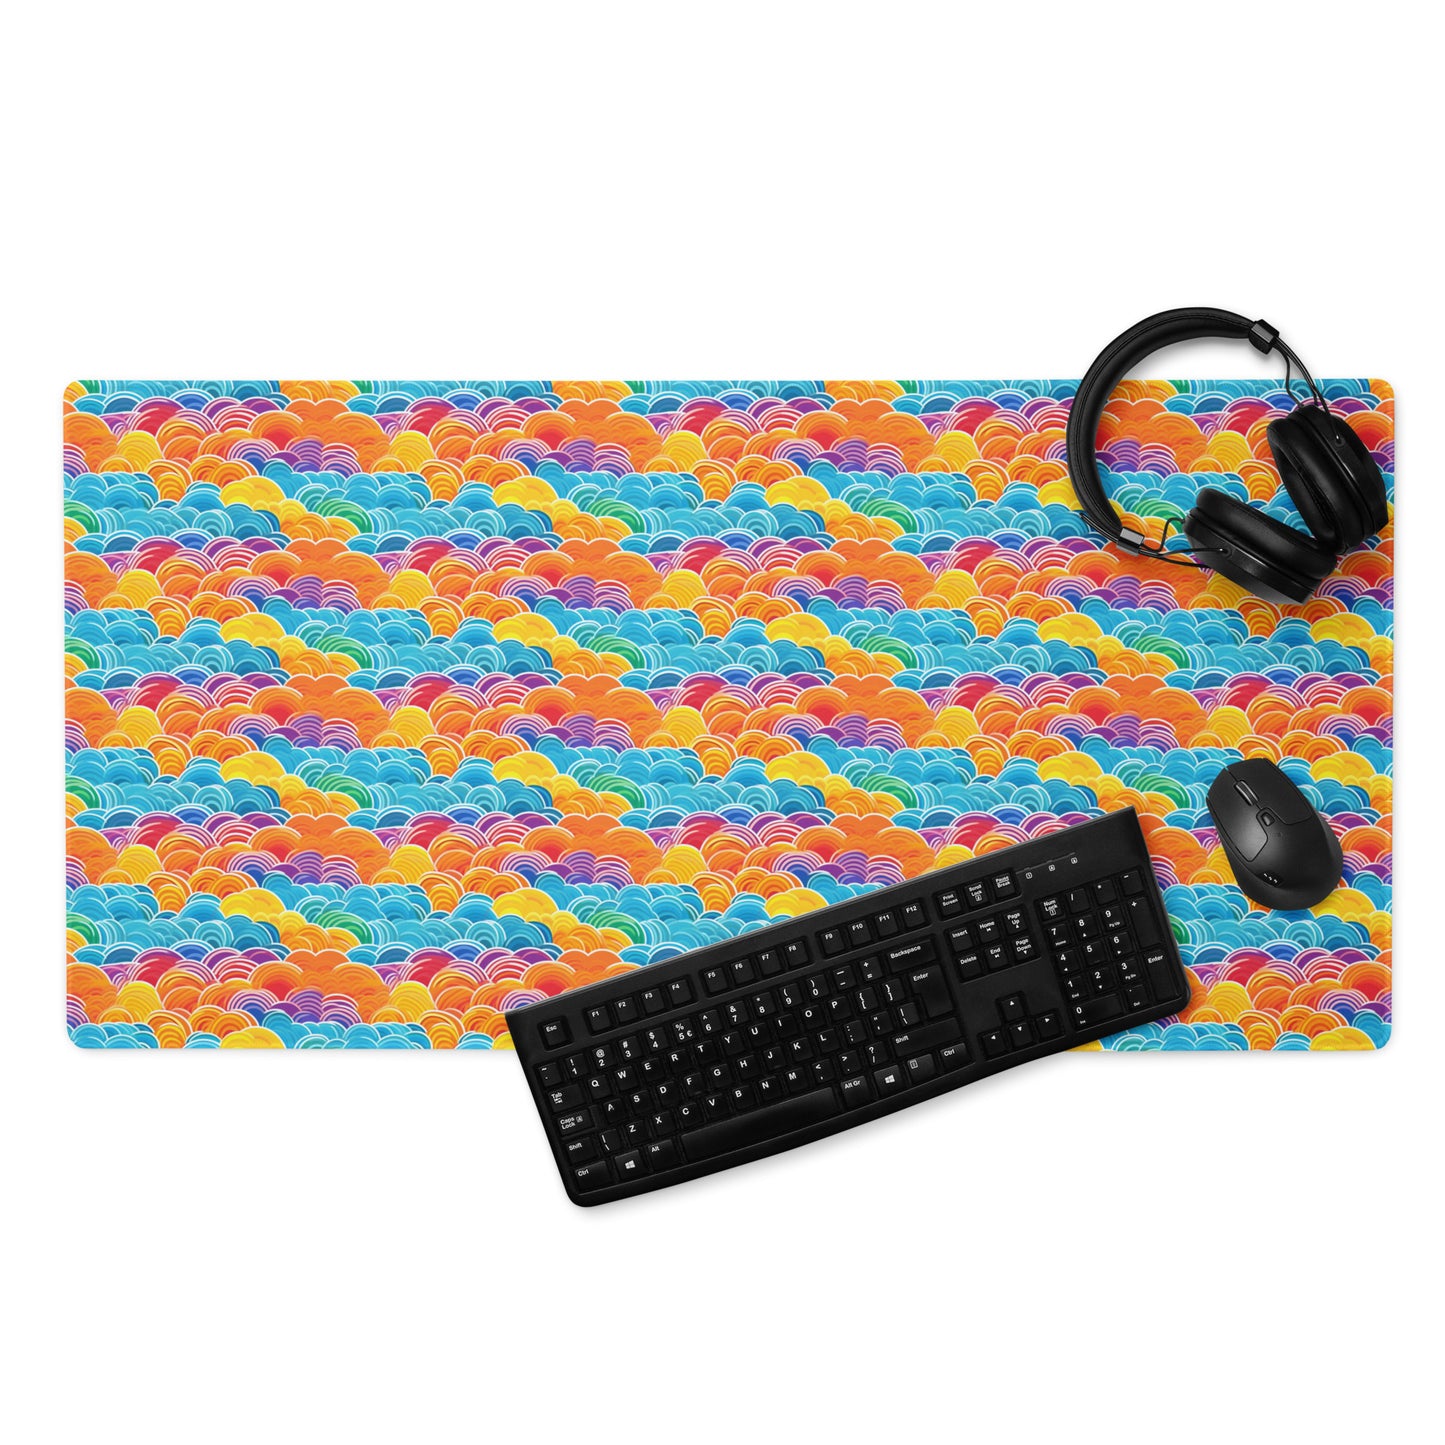 A 36" x 18" desk pad with bubbly swirly clouds all over it displayed with a keyboard, headphones and a mouse. Rainbow colored.